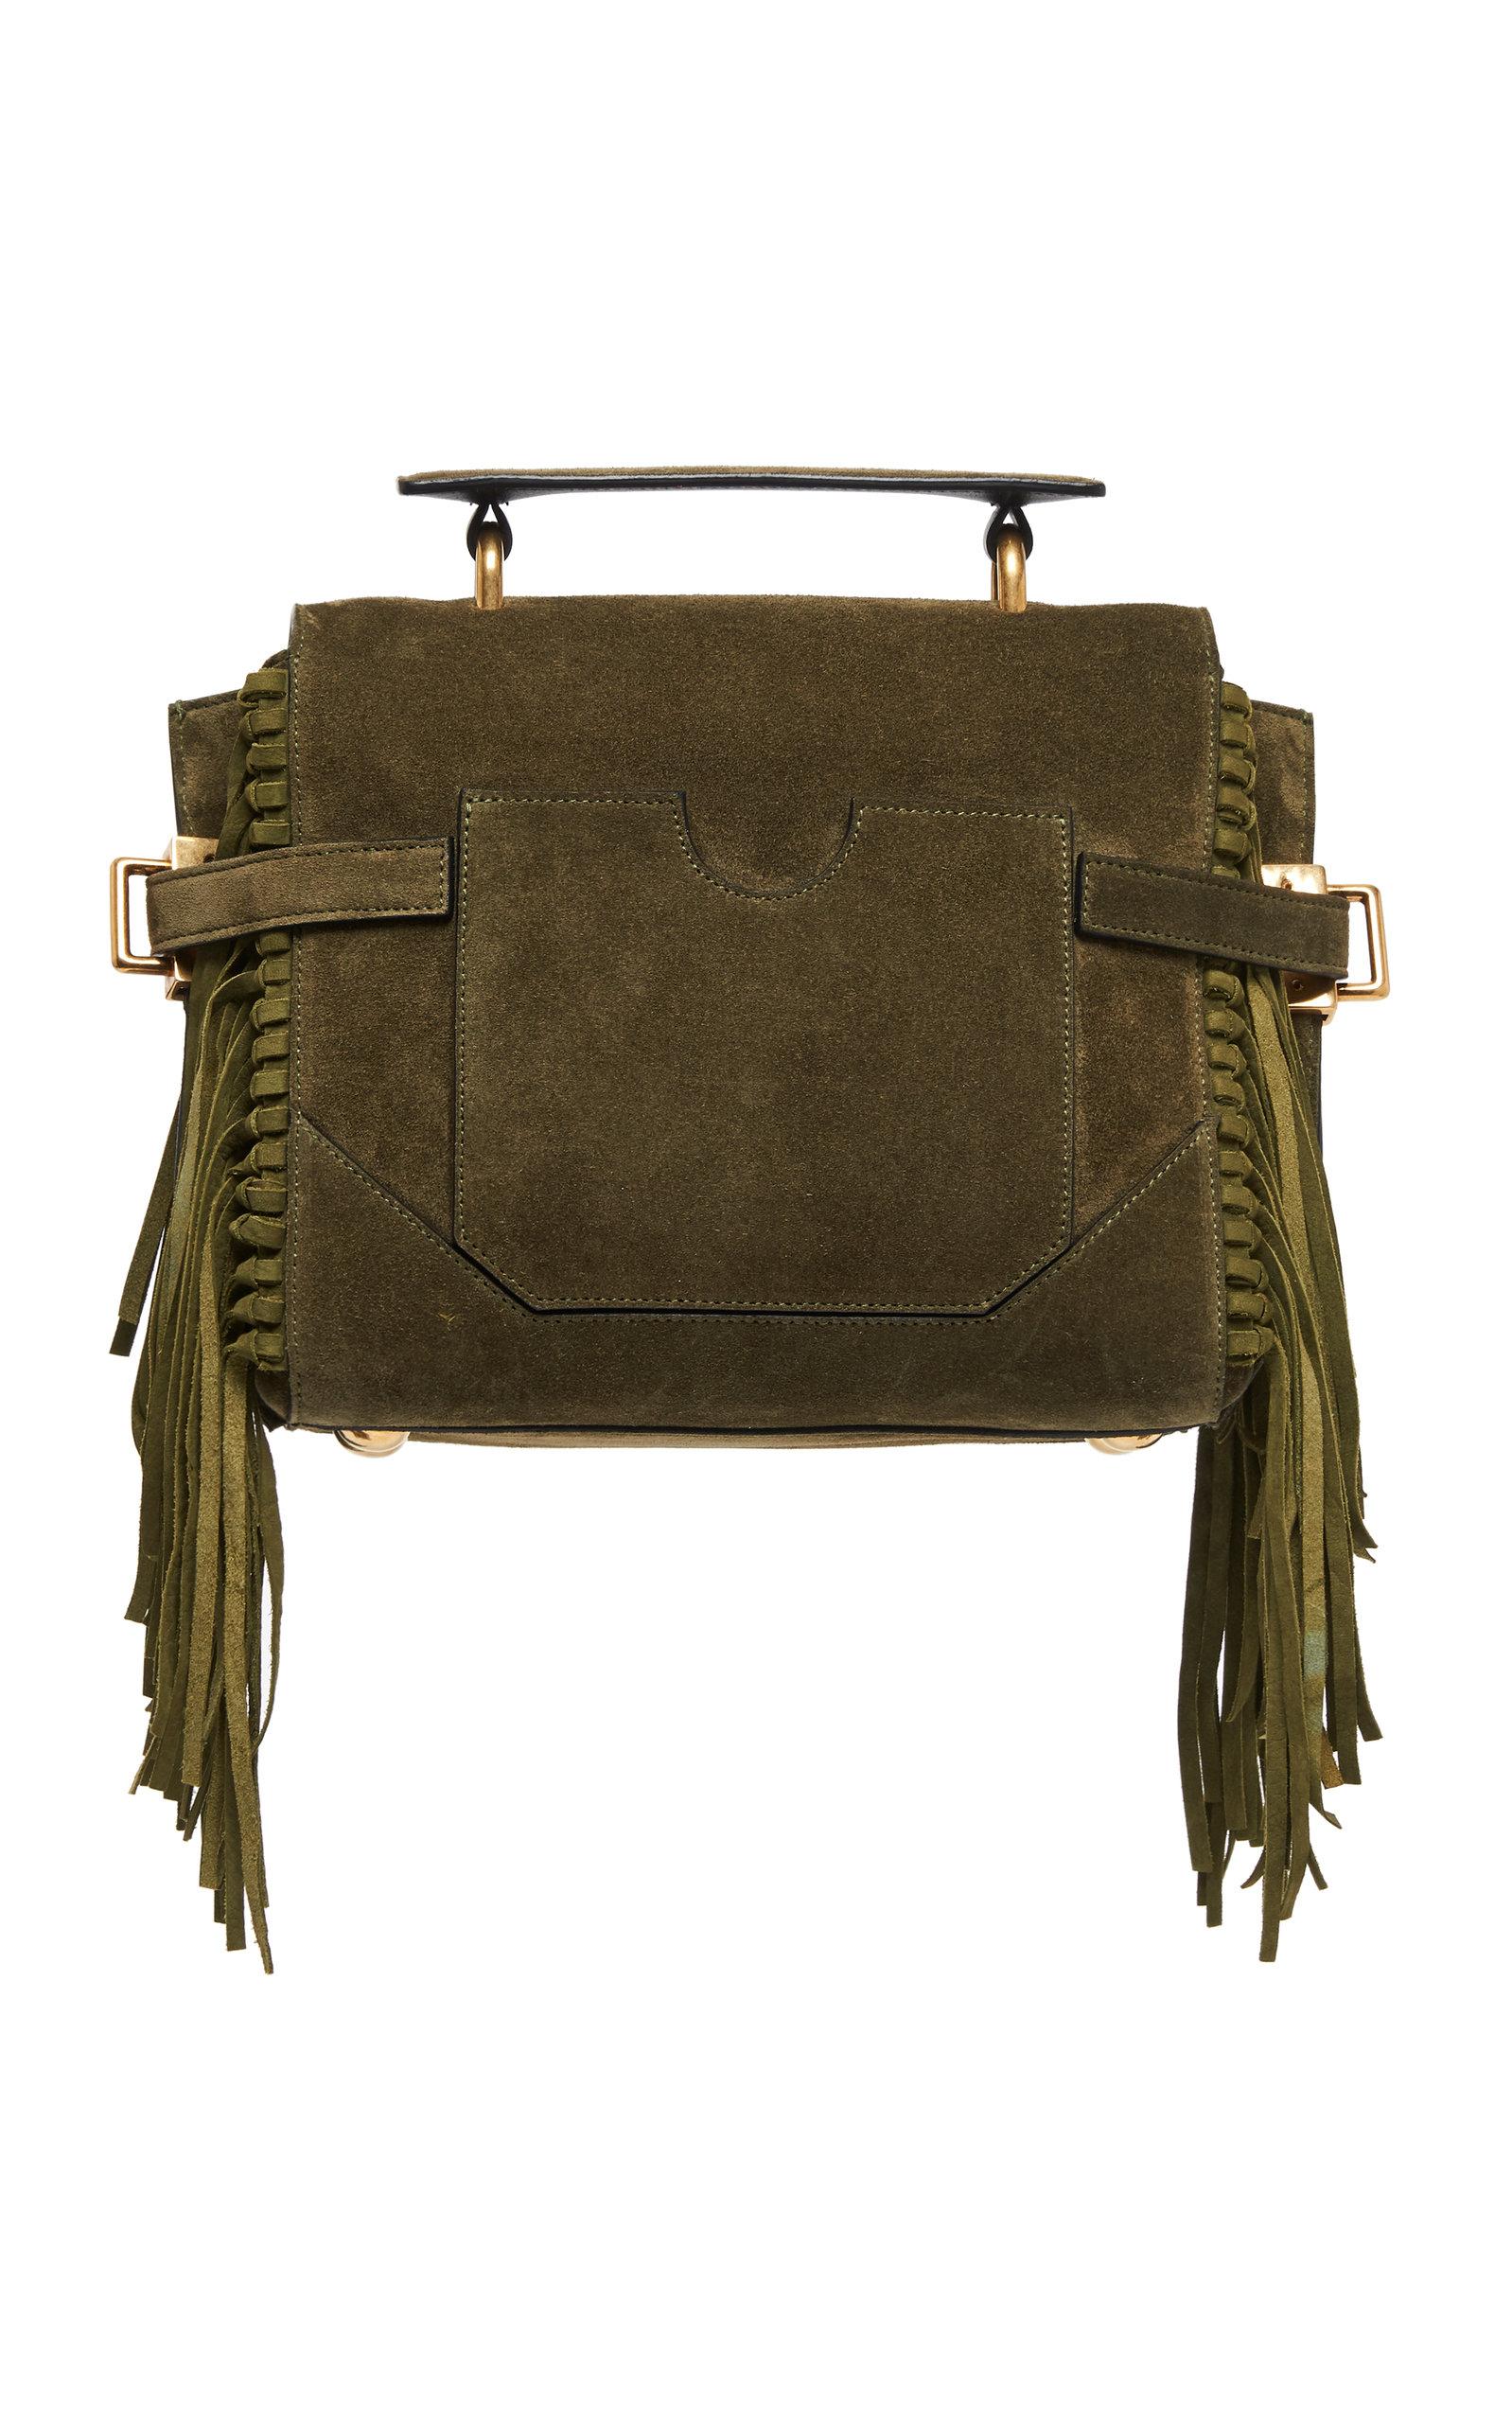 Balmain B-buzz 23 Quilted Fringe Suede Top Handle Bag in Green | Lyst